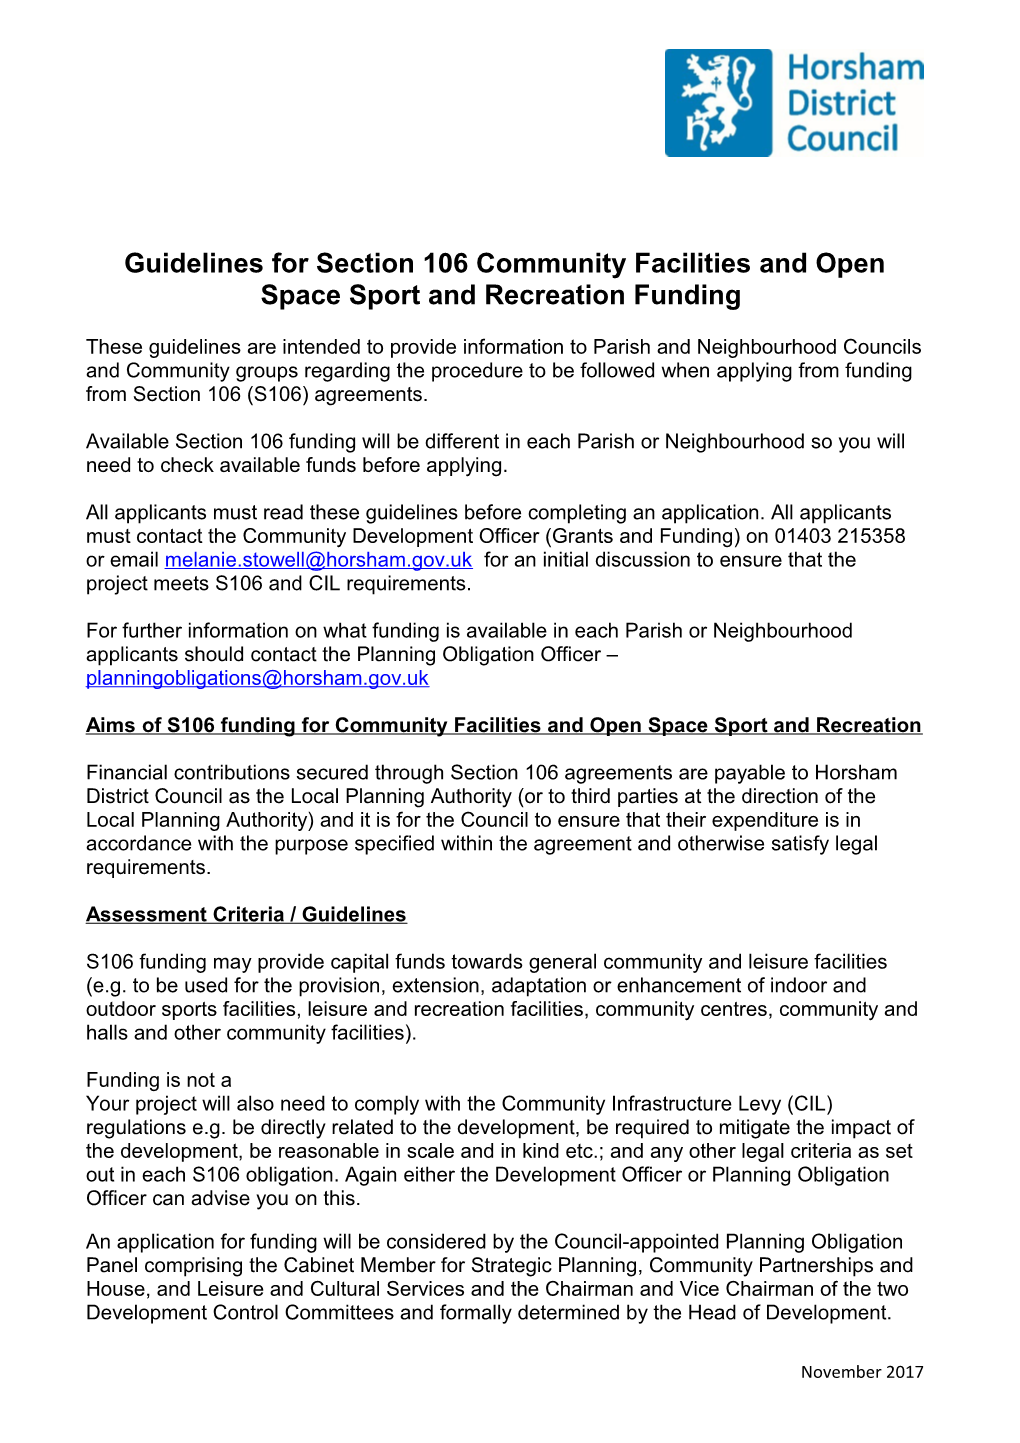 Guidelines for Section 106 Community Facilities and Open Space Sport and Recreation Funding